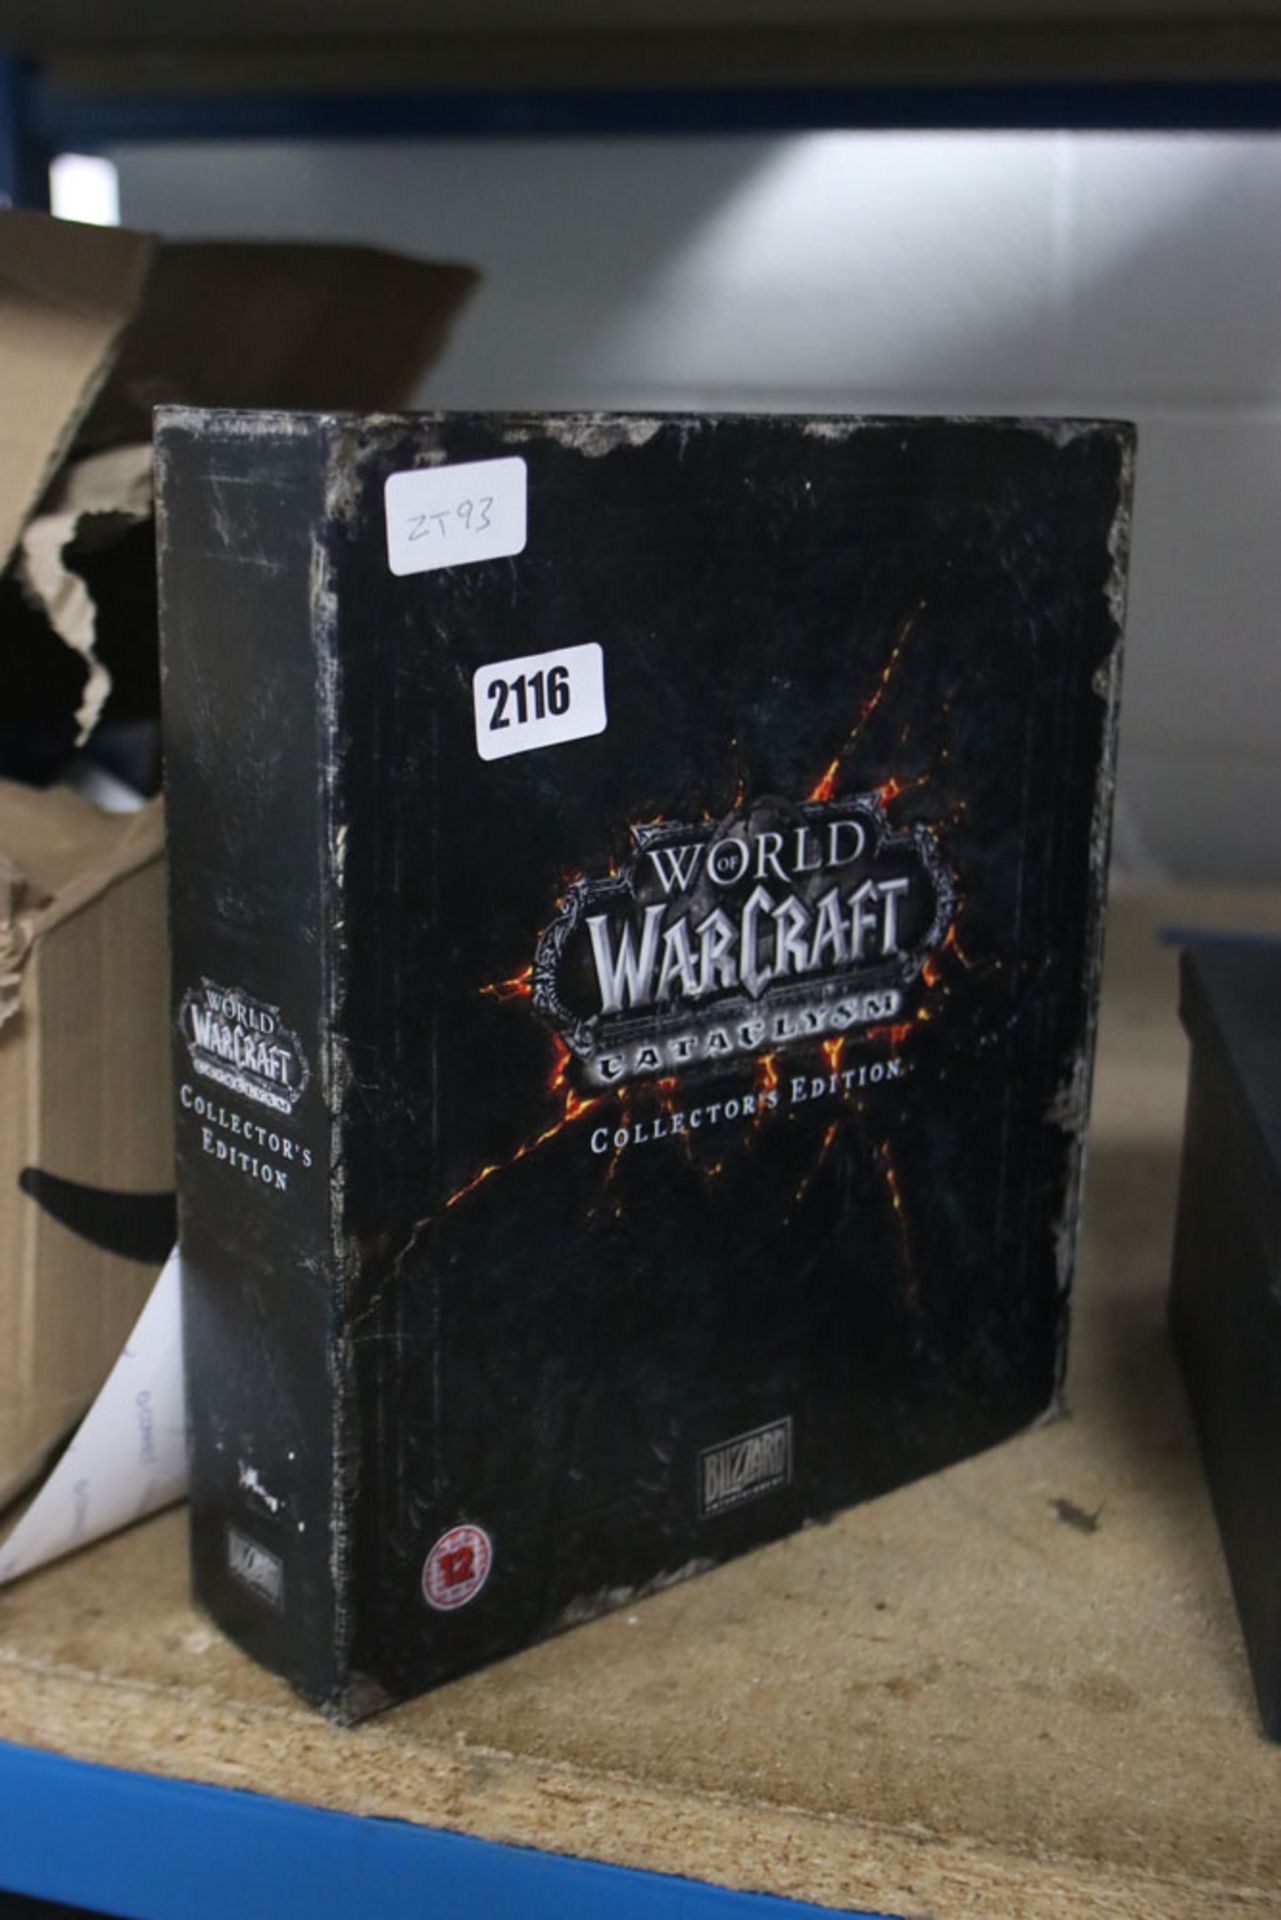 World of Warcraft collectors edition set by Blizzard